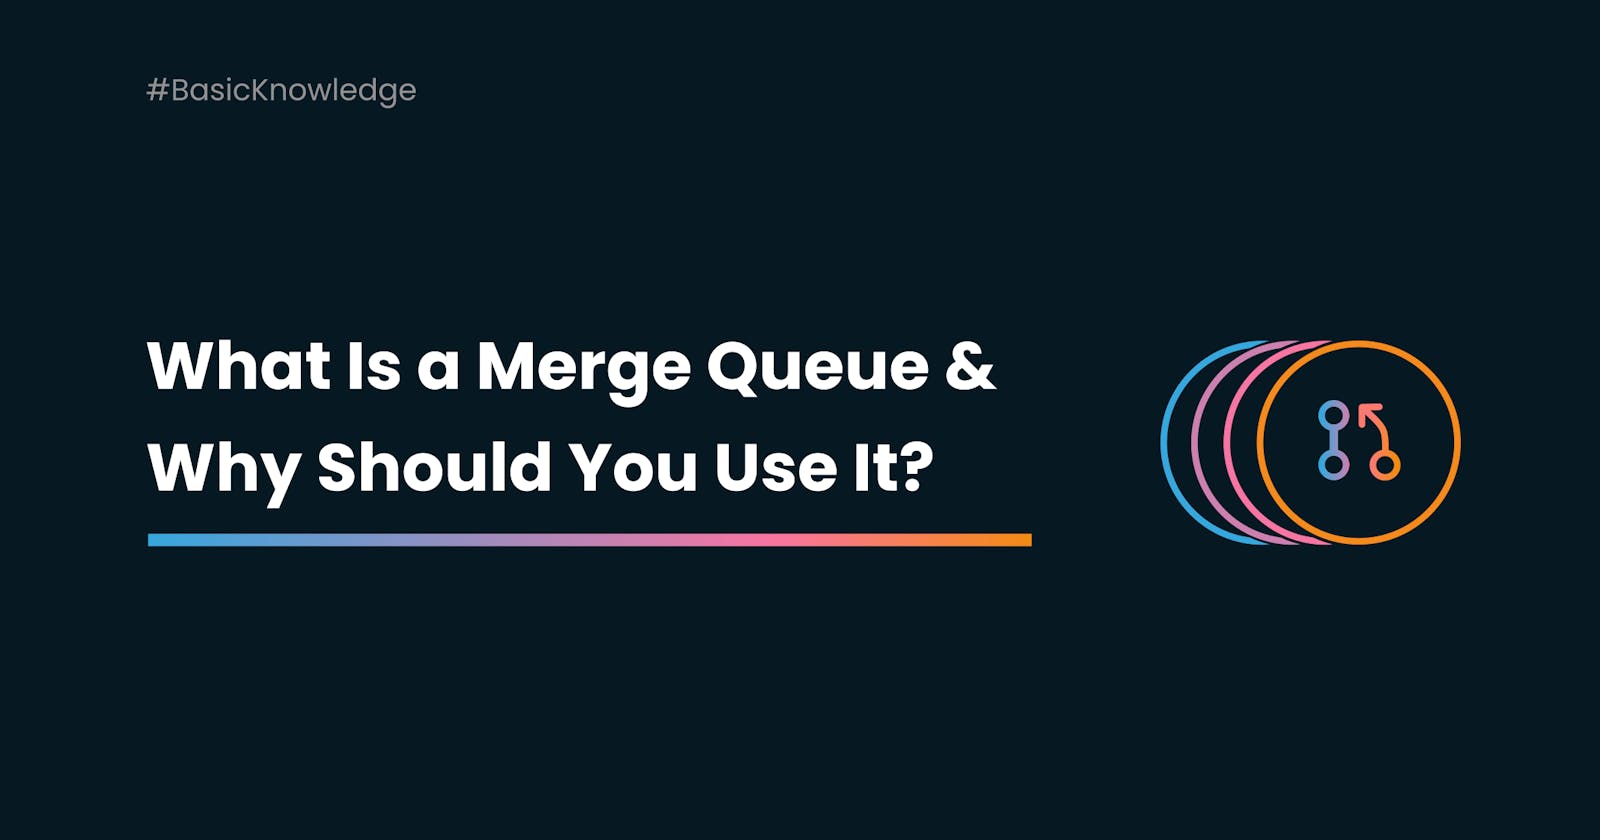 What’s a Merge Queue and Why Use it?